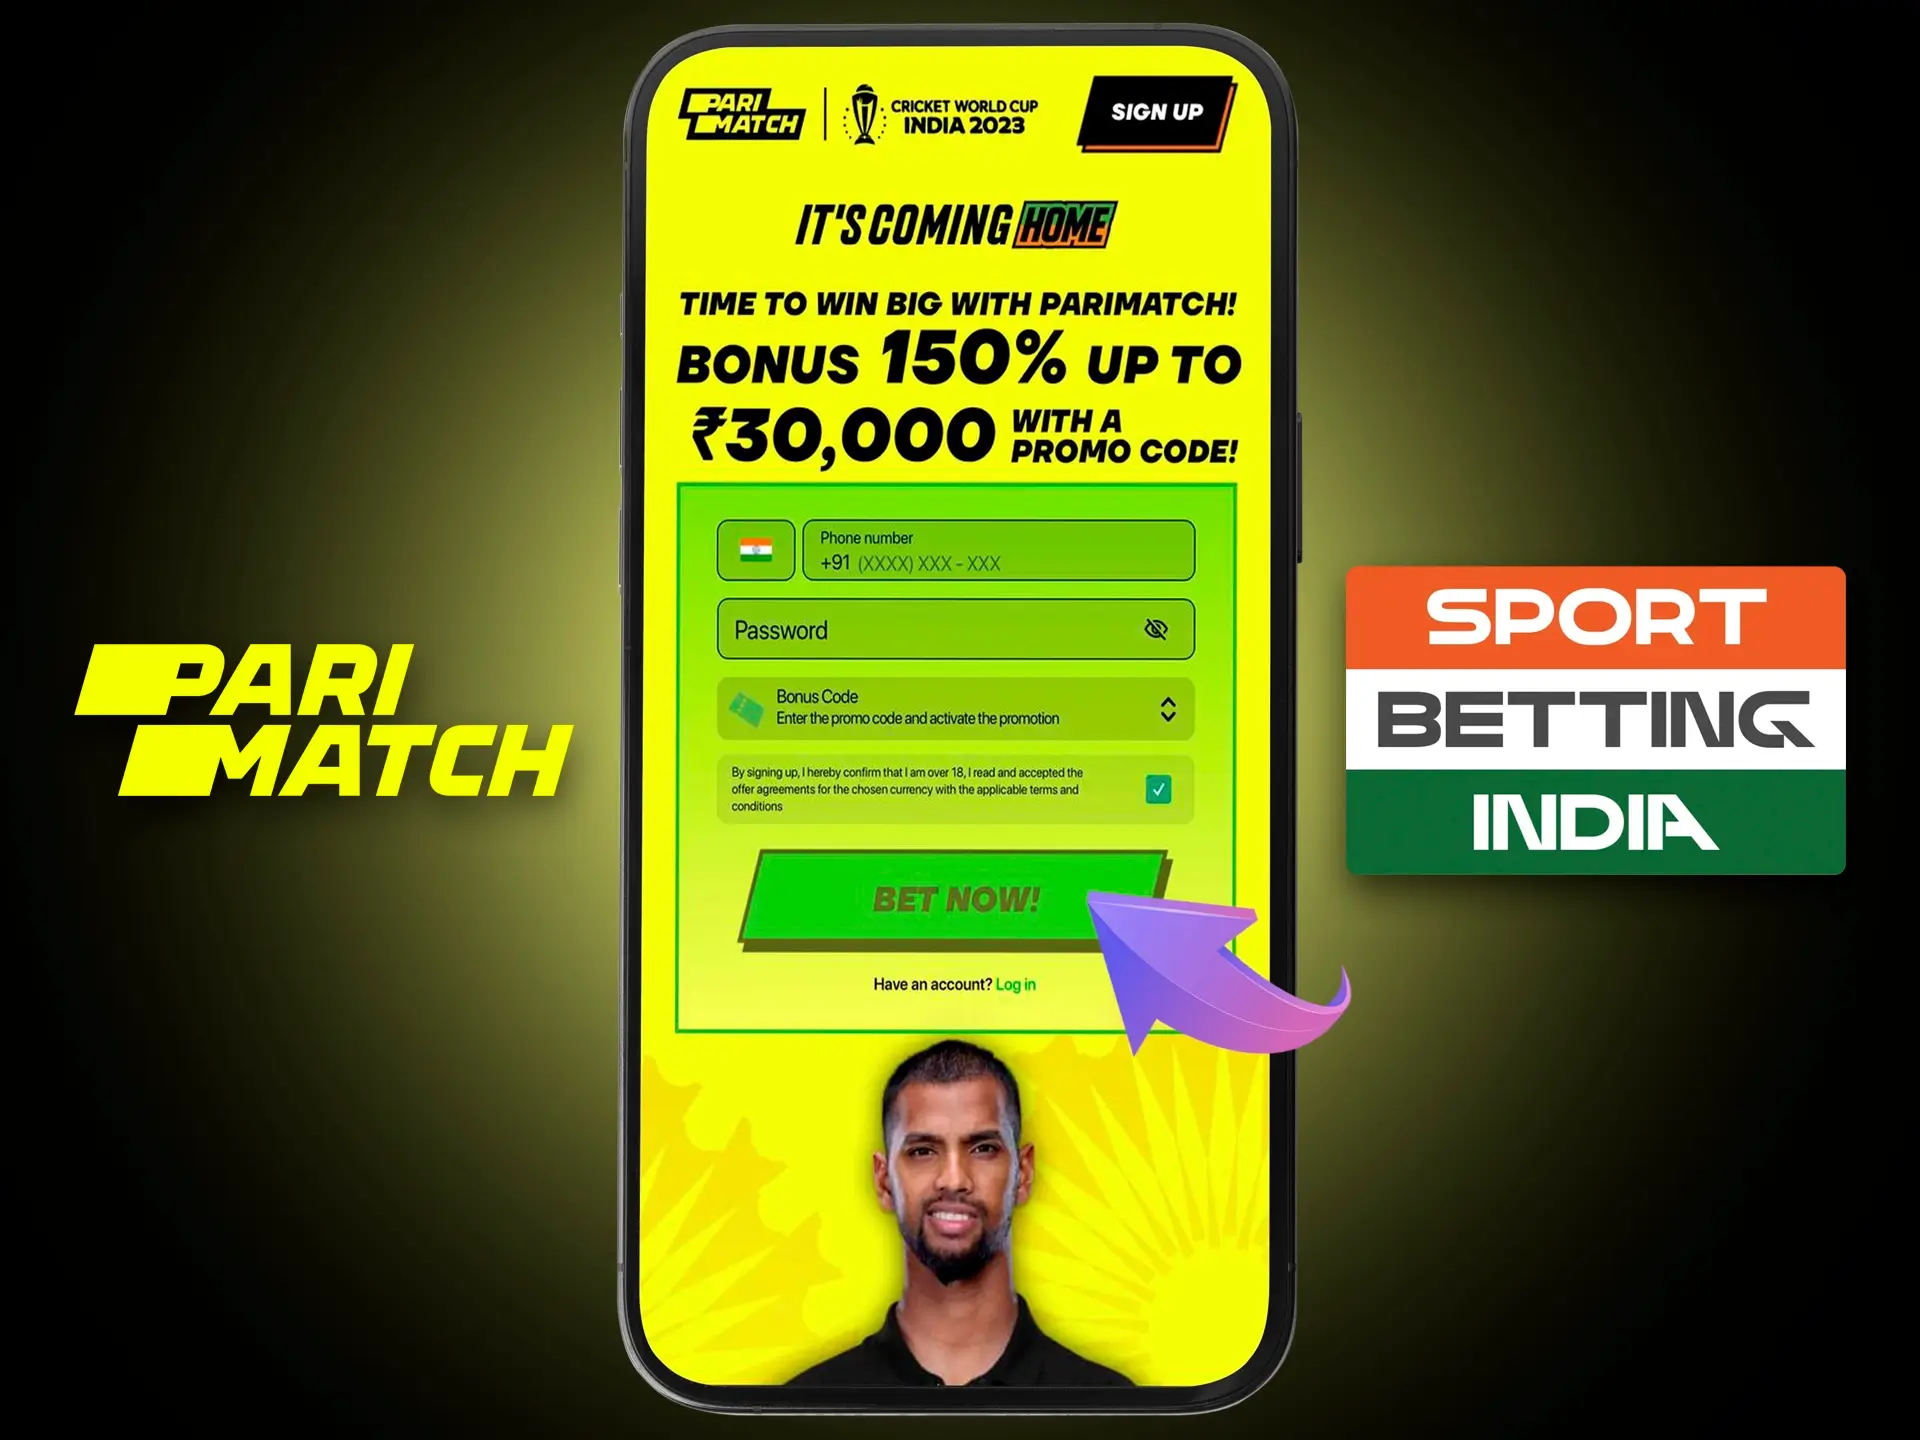 Before you start betting, register on the Parimatch website.